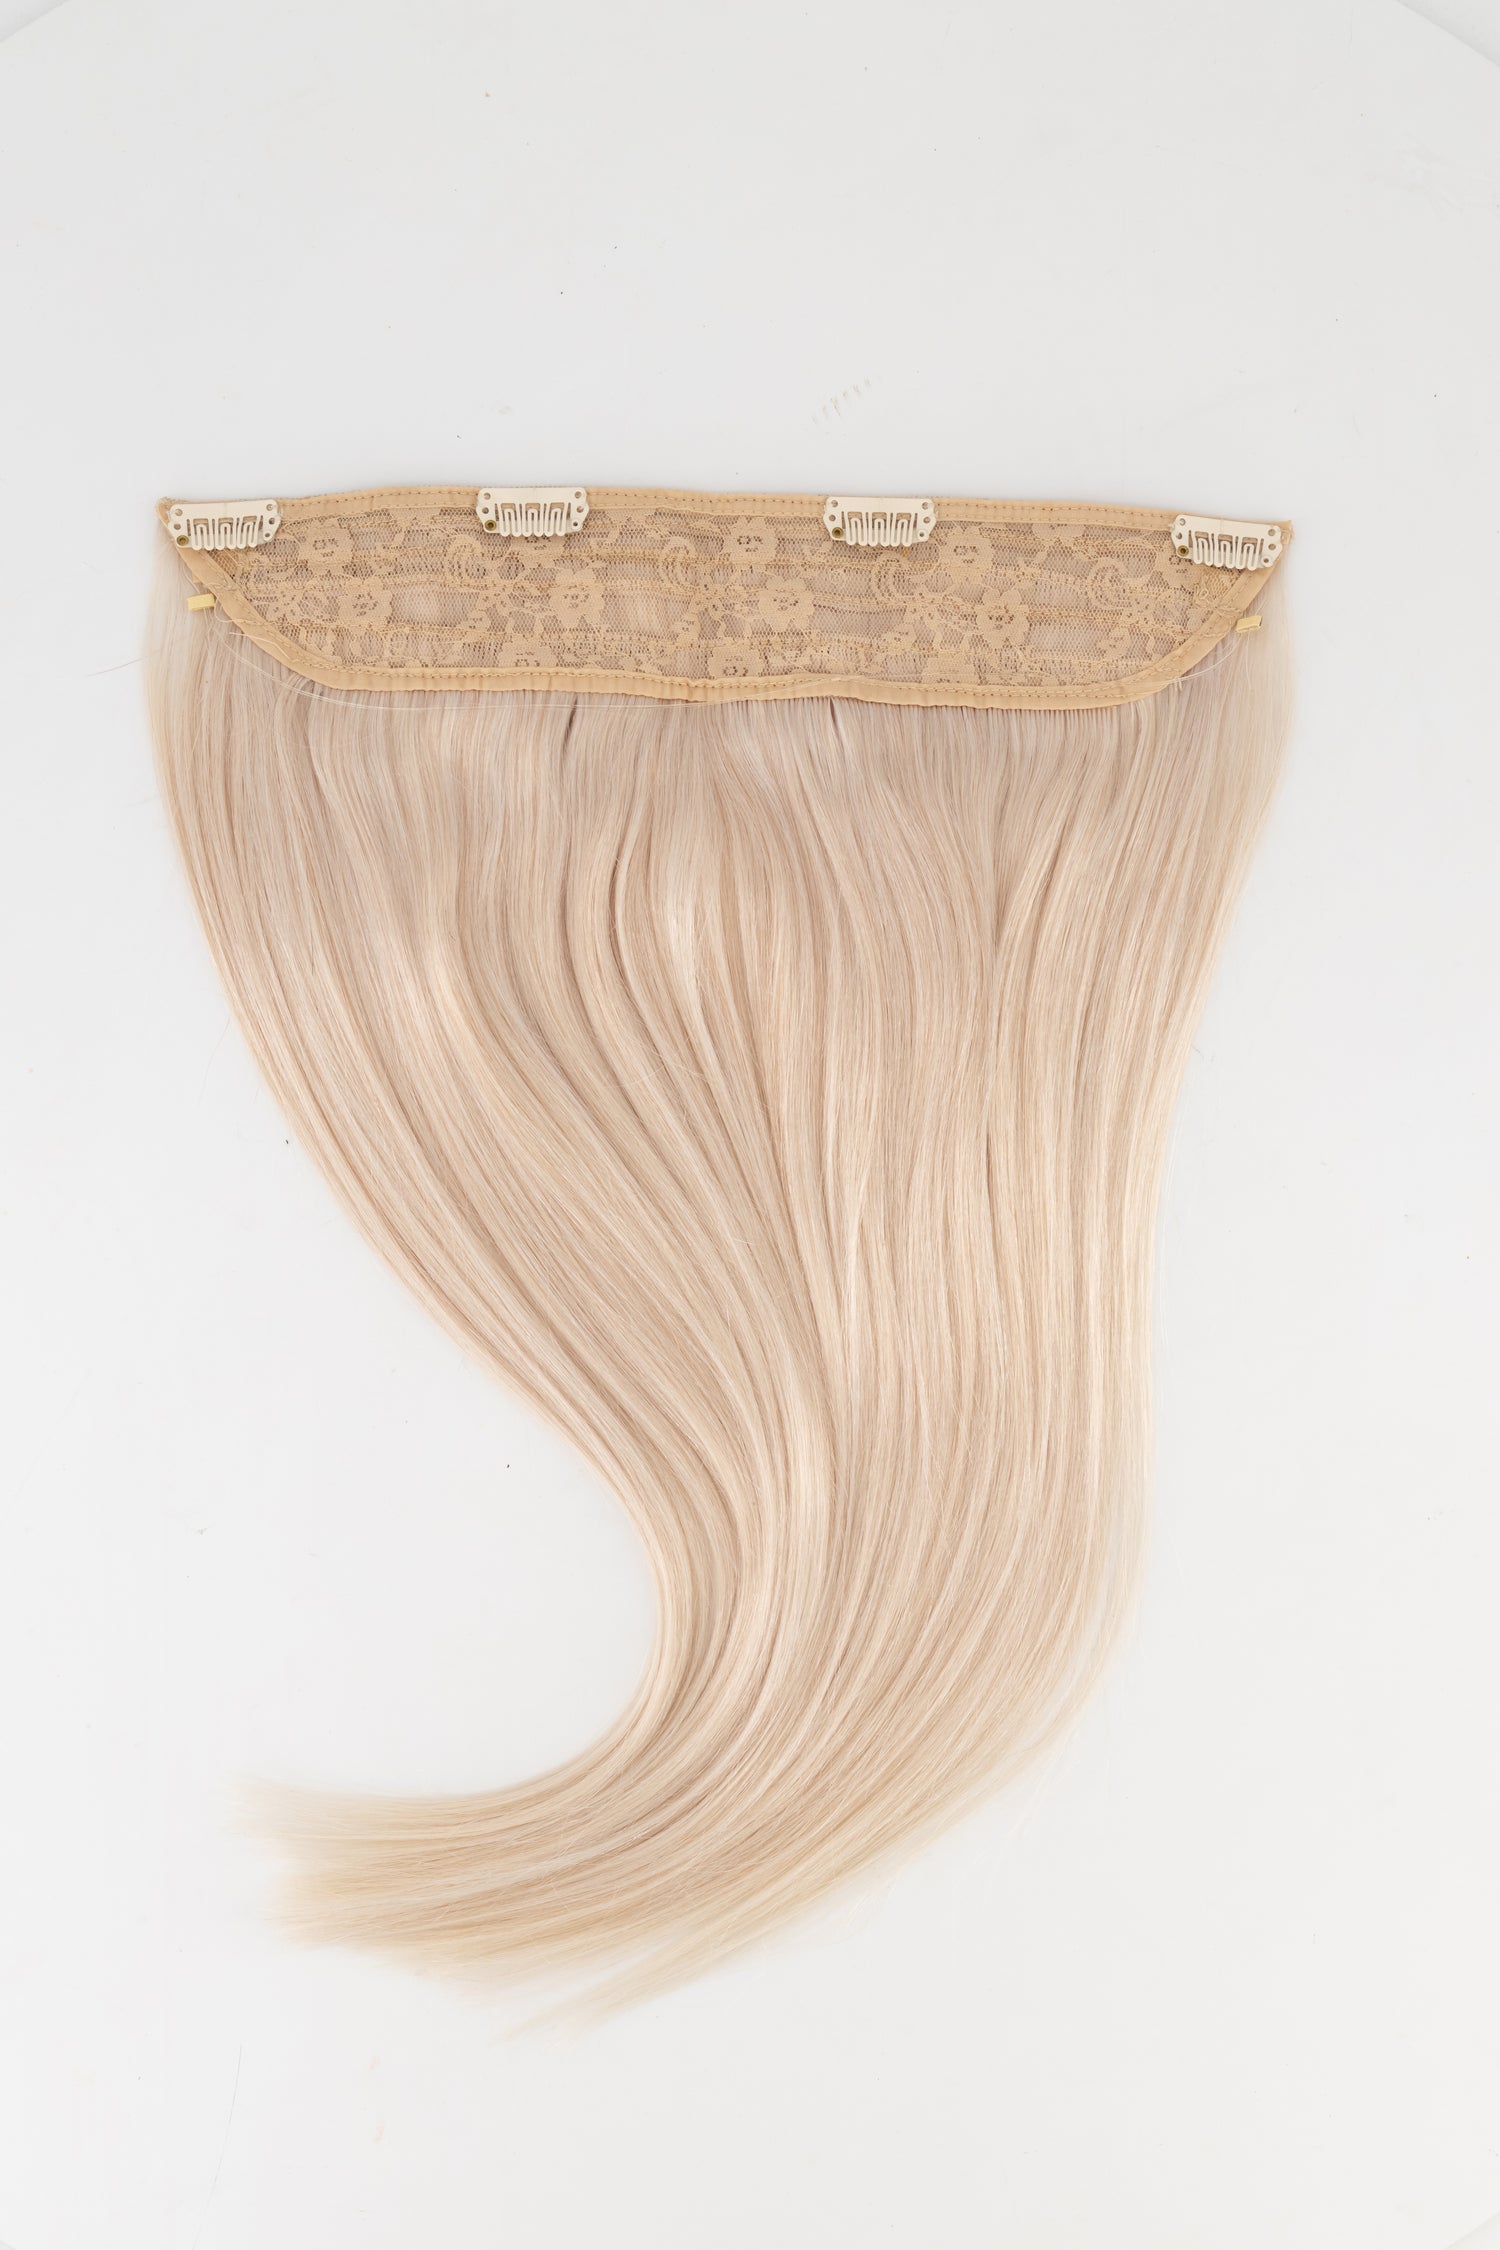 Frontrow halo hair extensions in ash blonde